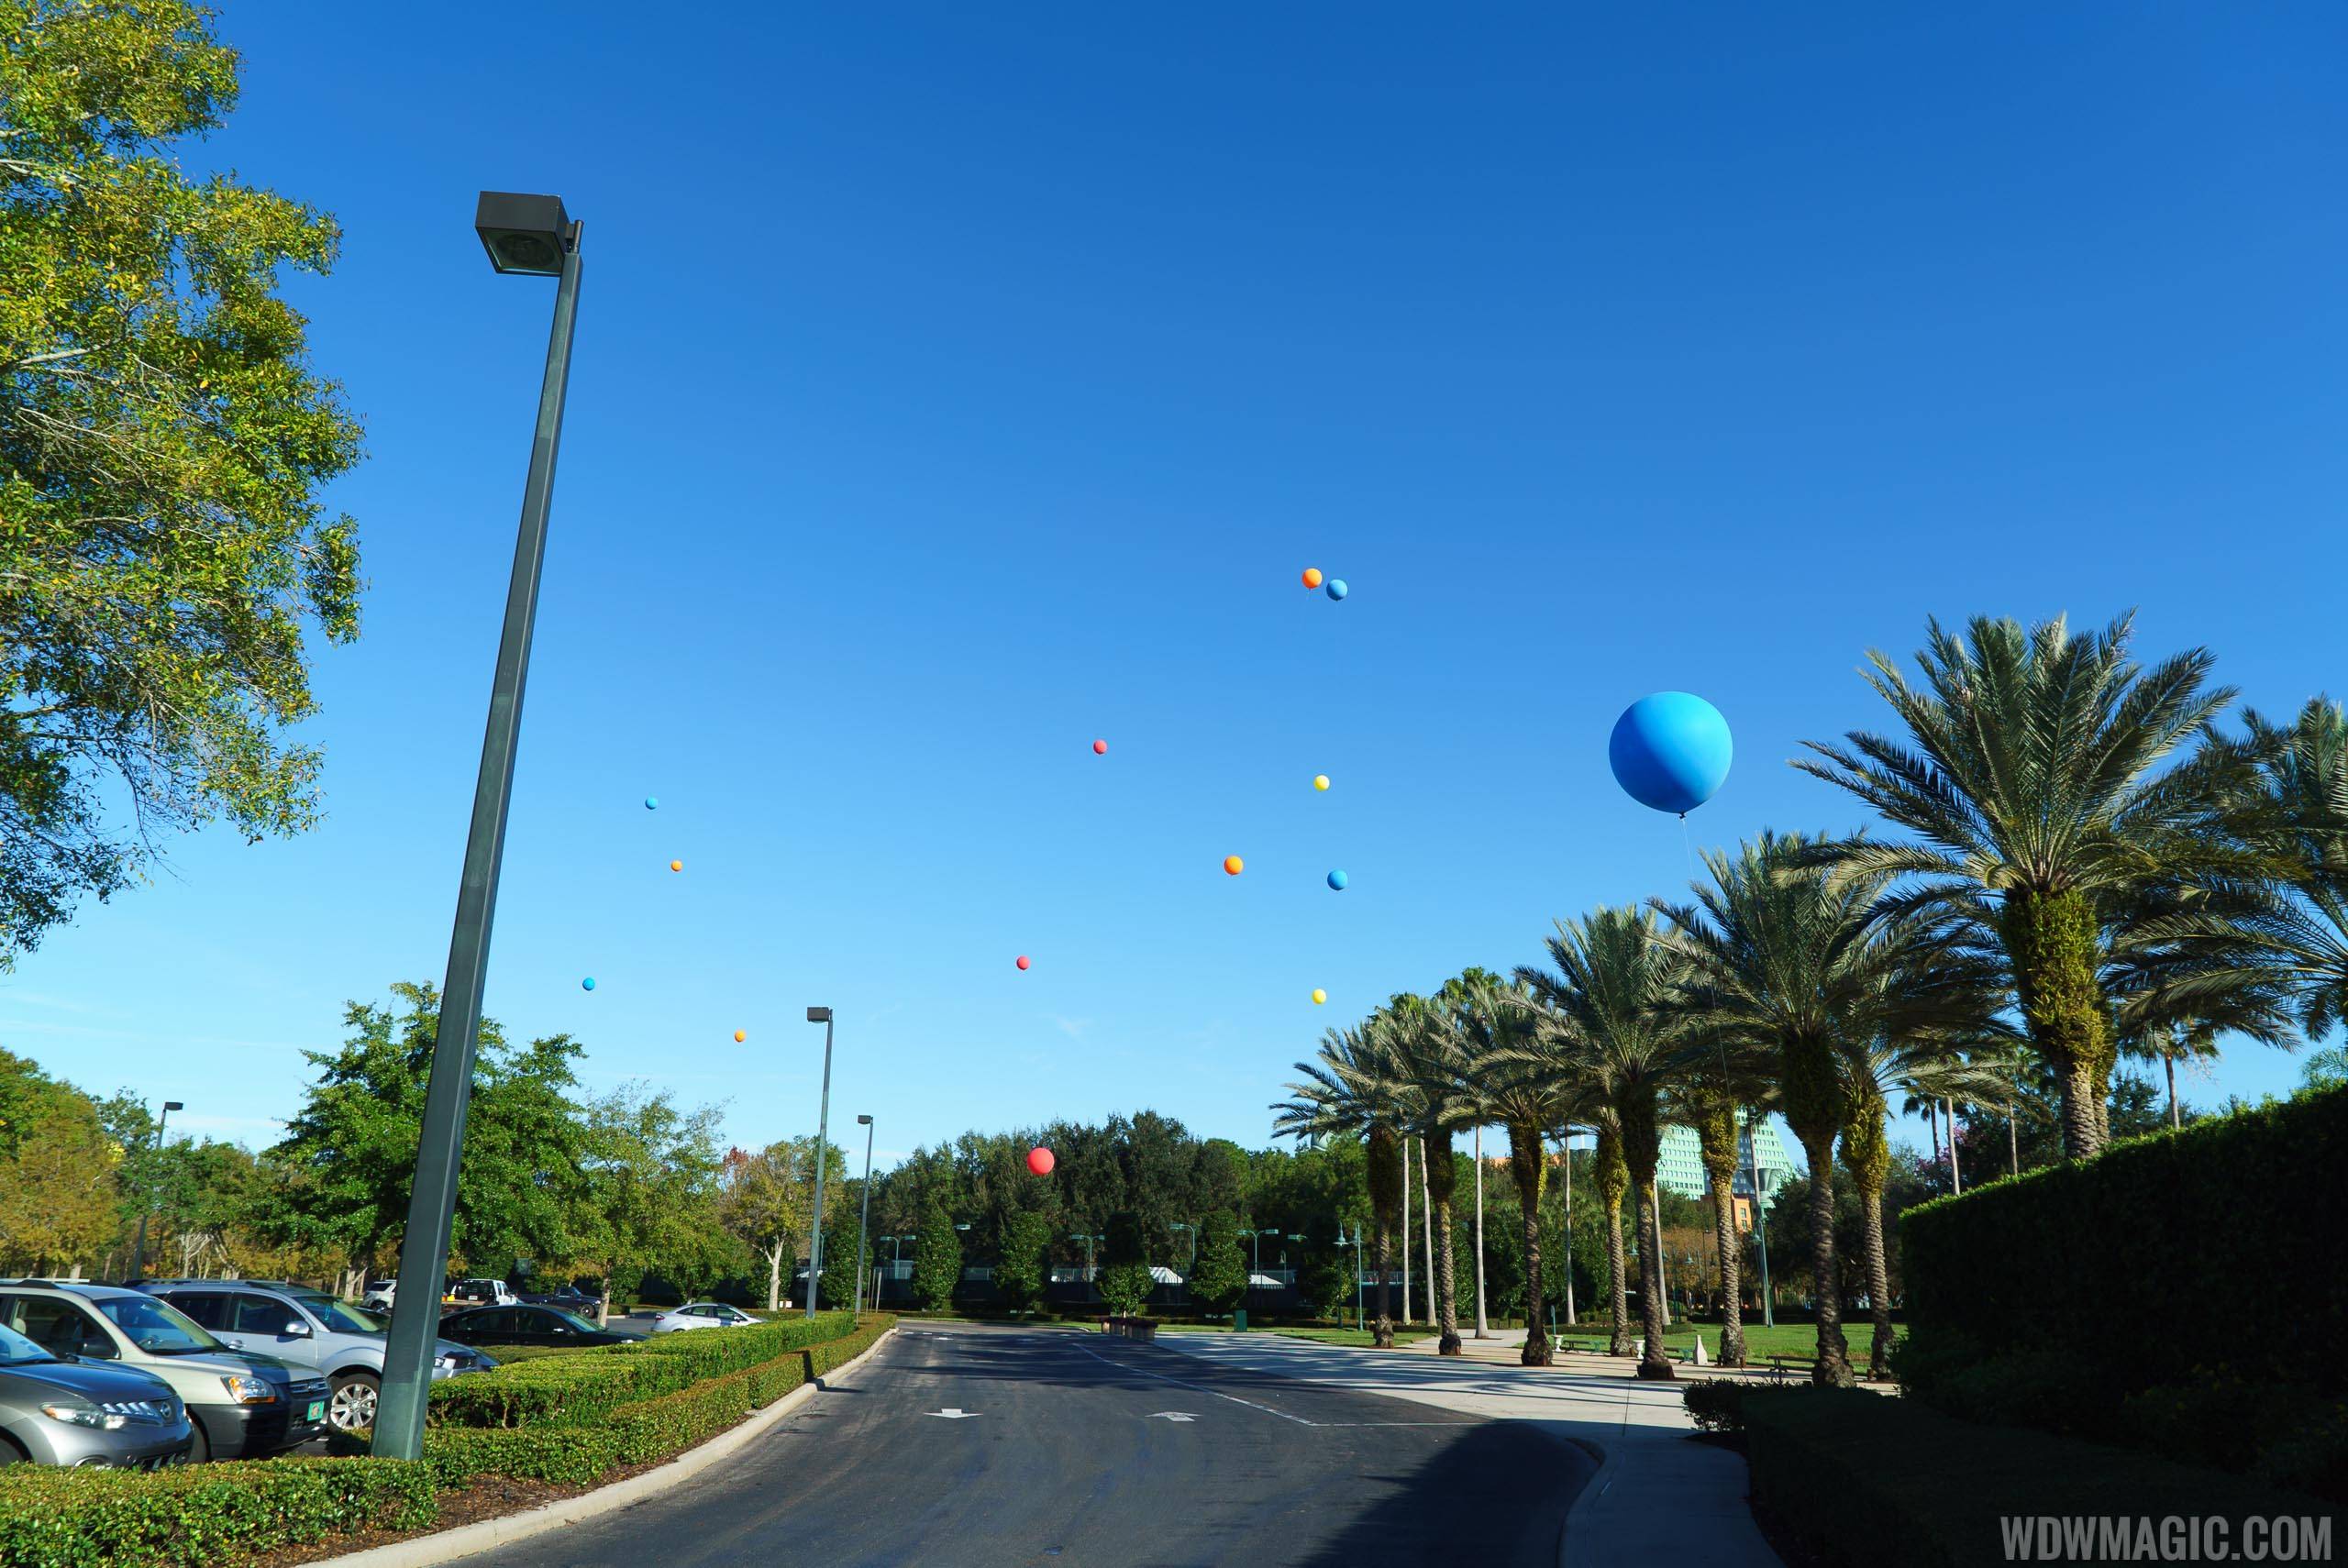 Height test balloons near the Fantasia Gardens mini-golf for a previous non-related project